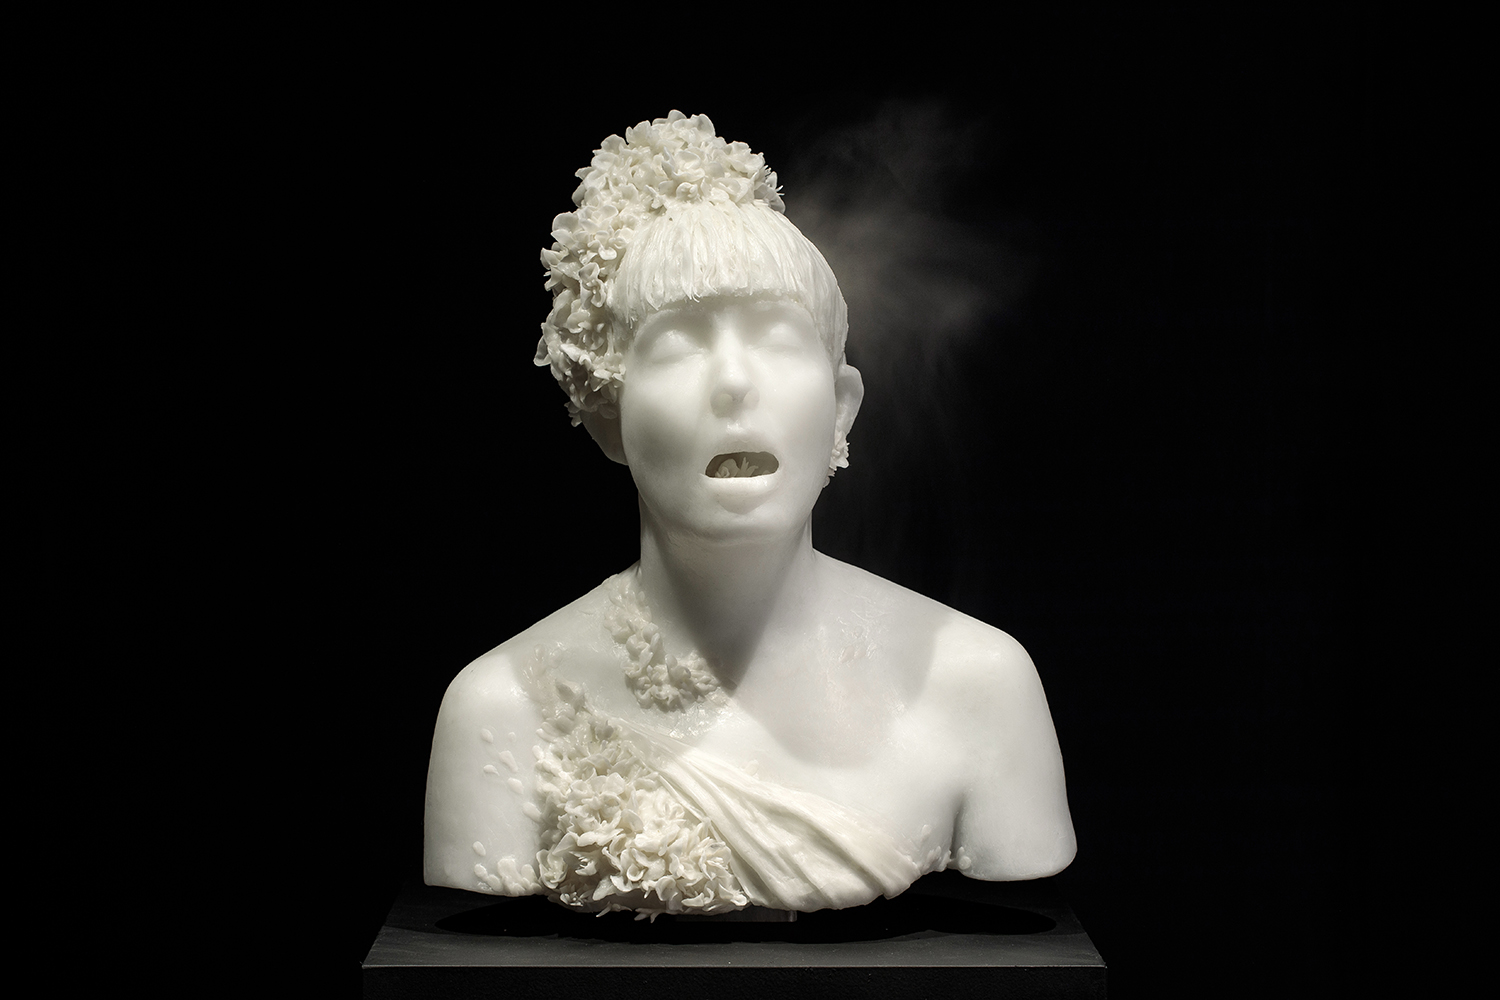 Set against a black background, the white sculpted bust of a woman exhales a plume of vapour.